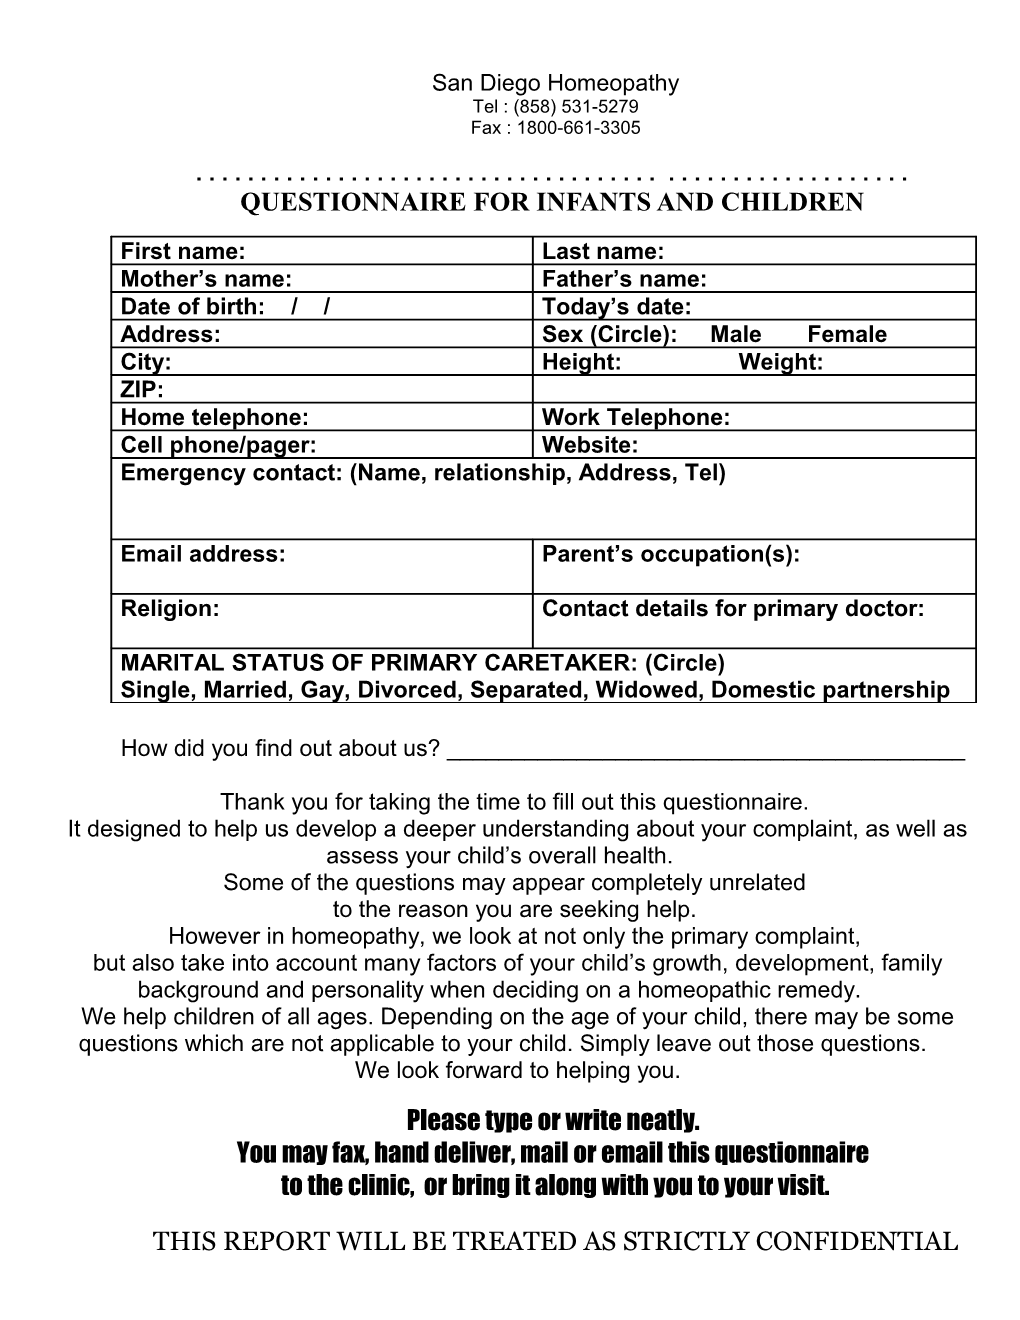 Questionnaire for Infants and Children